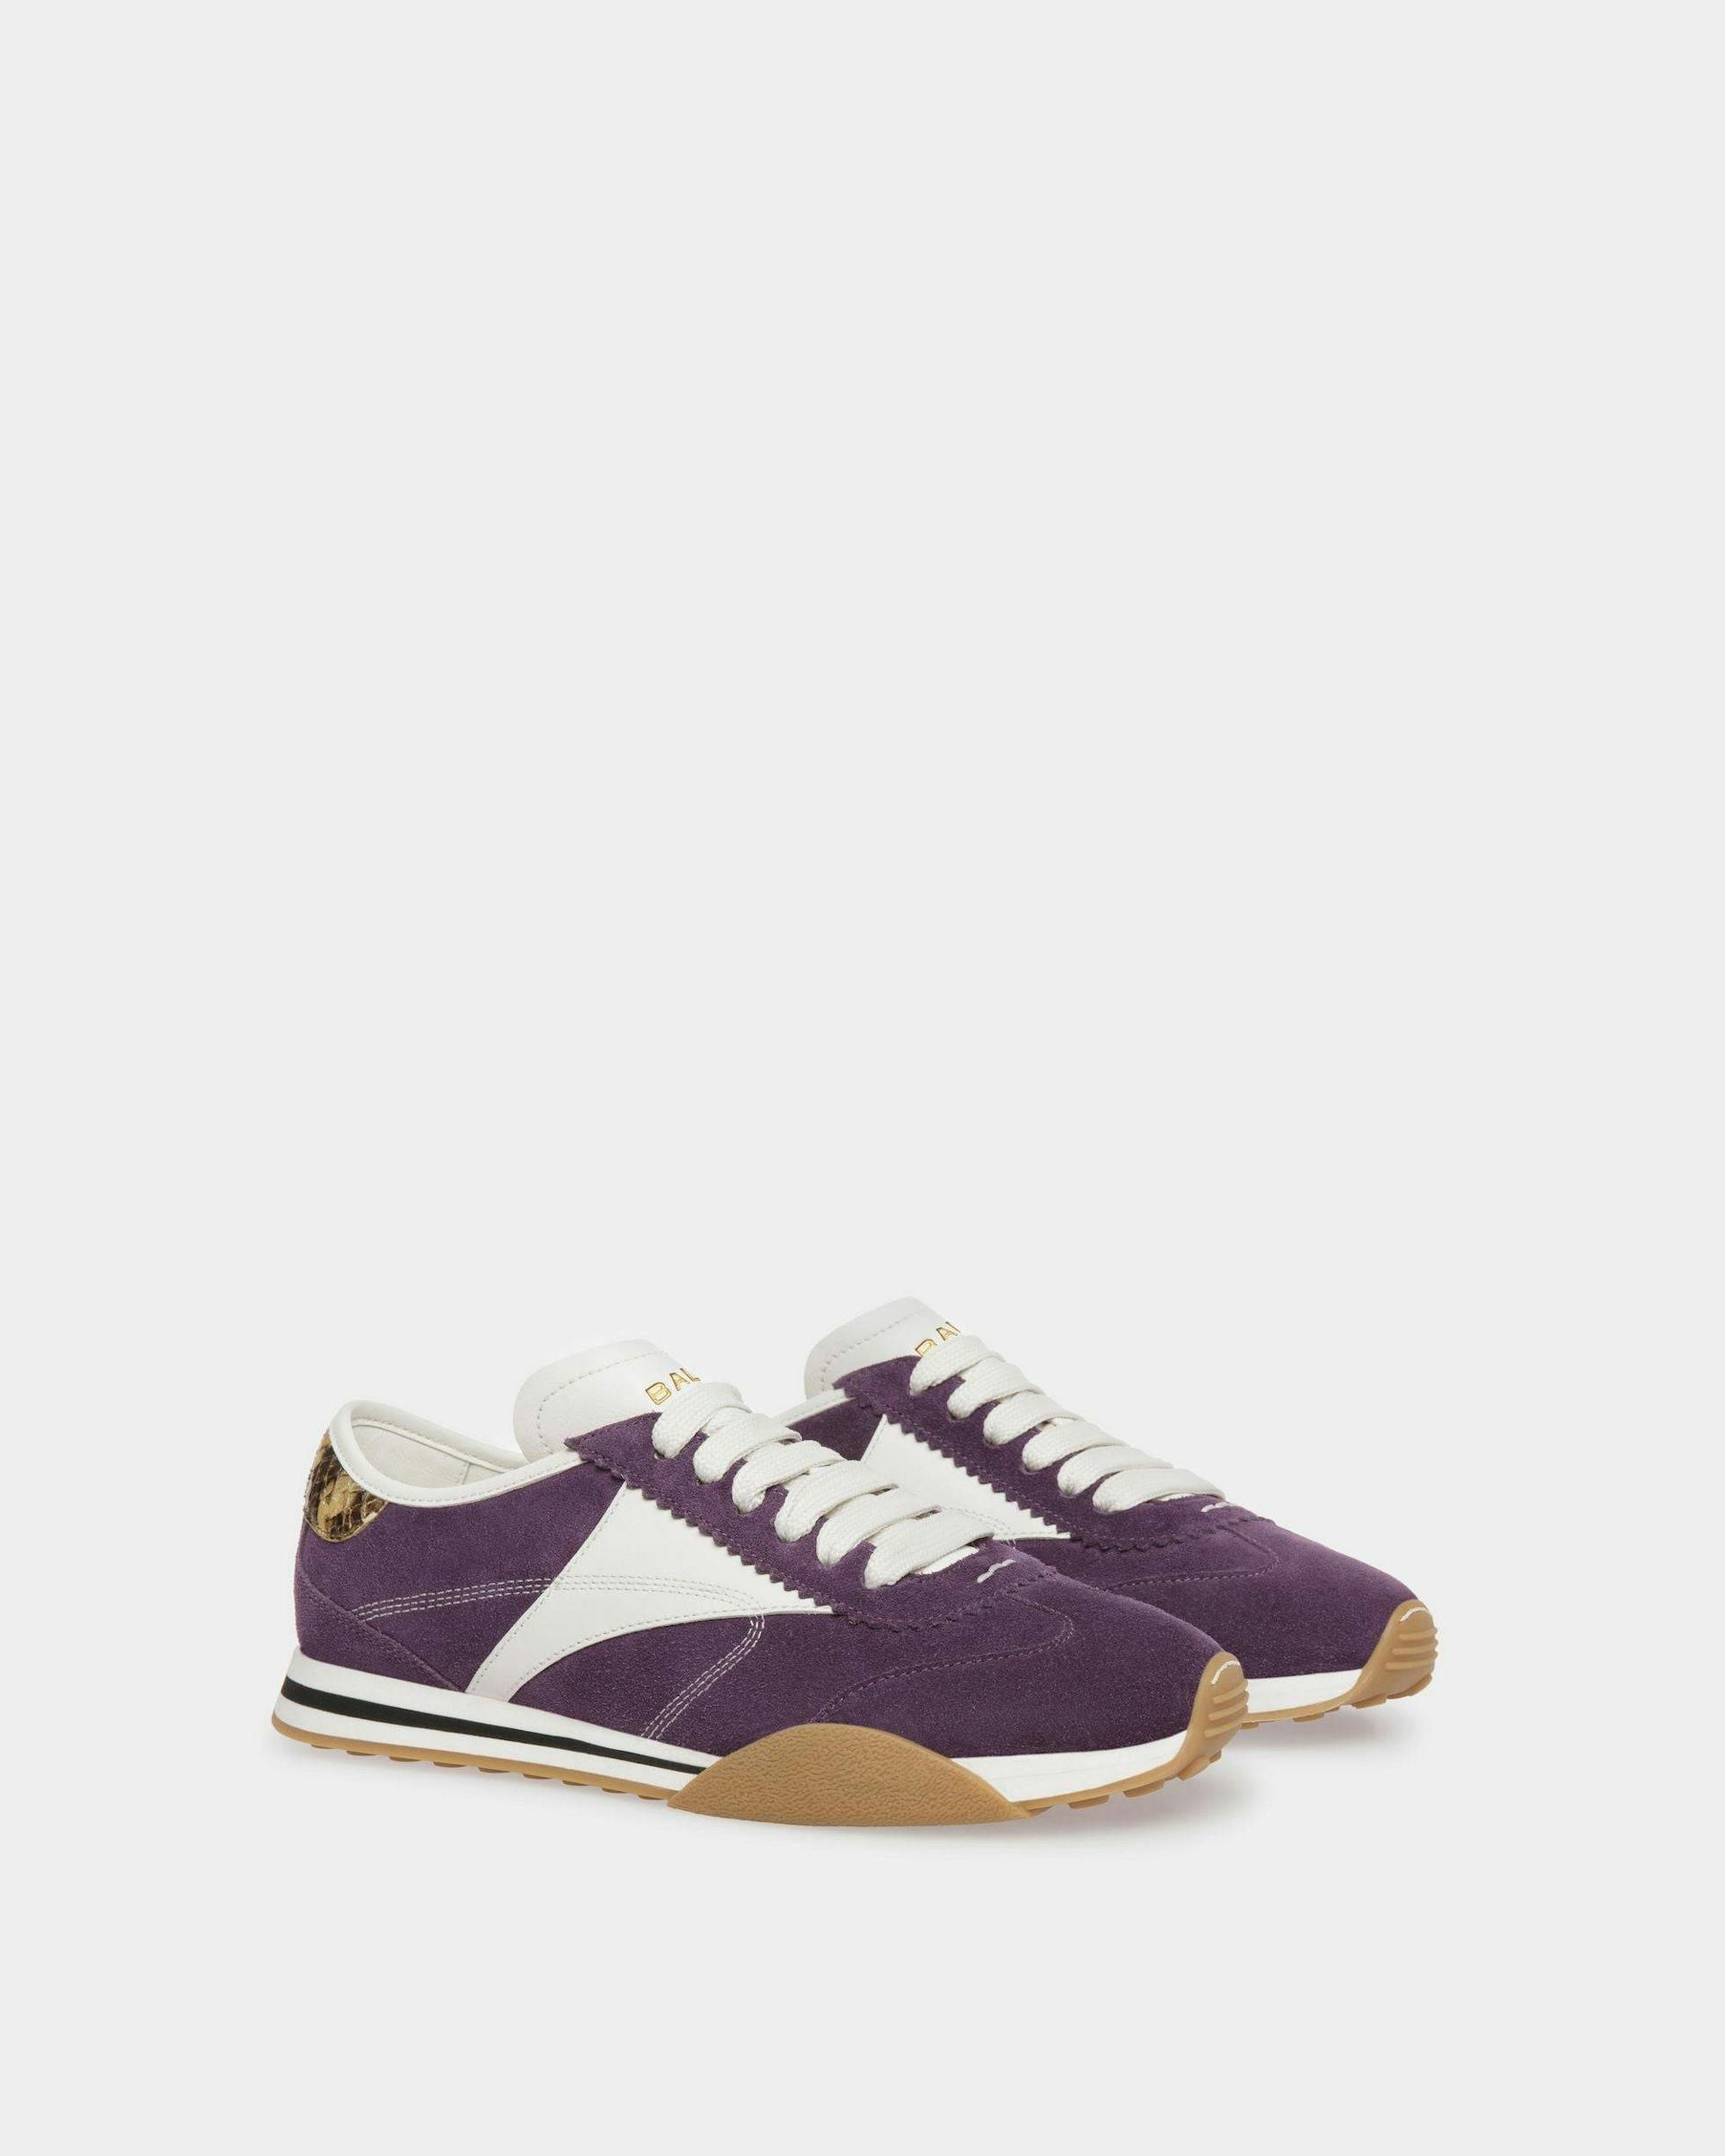 Sussex Sneakers In Orchid And White Leather - Women's - Bally - 03